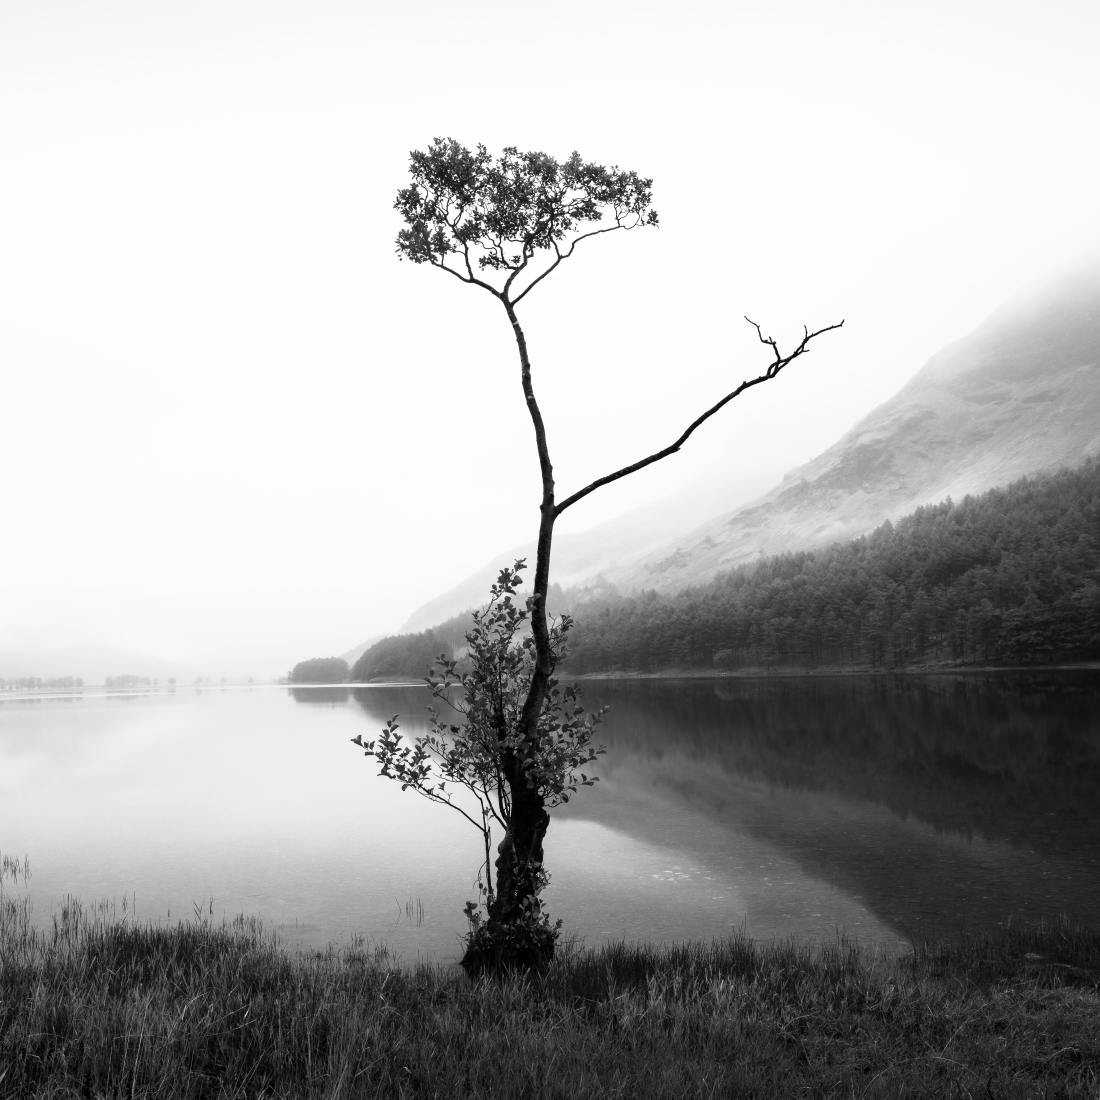 Beaut at Buttermere